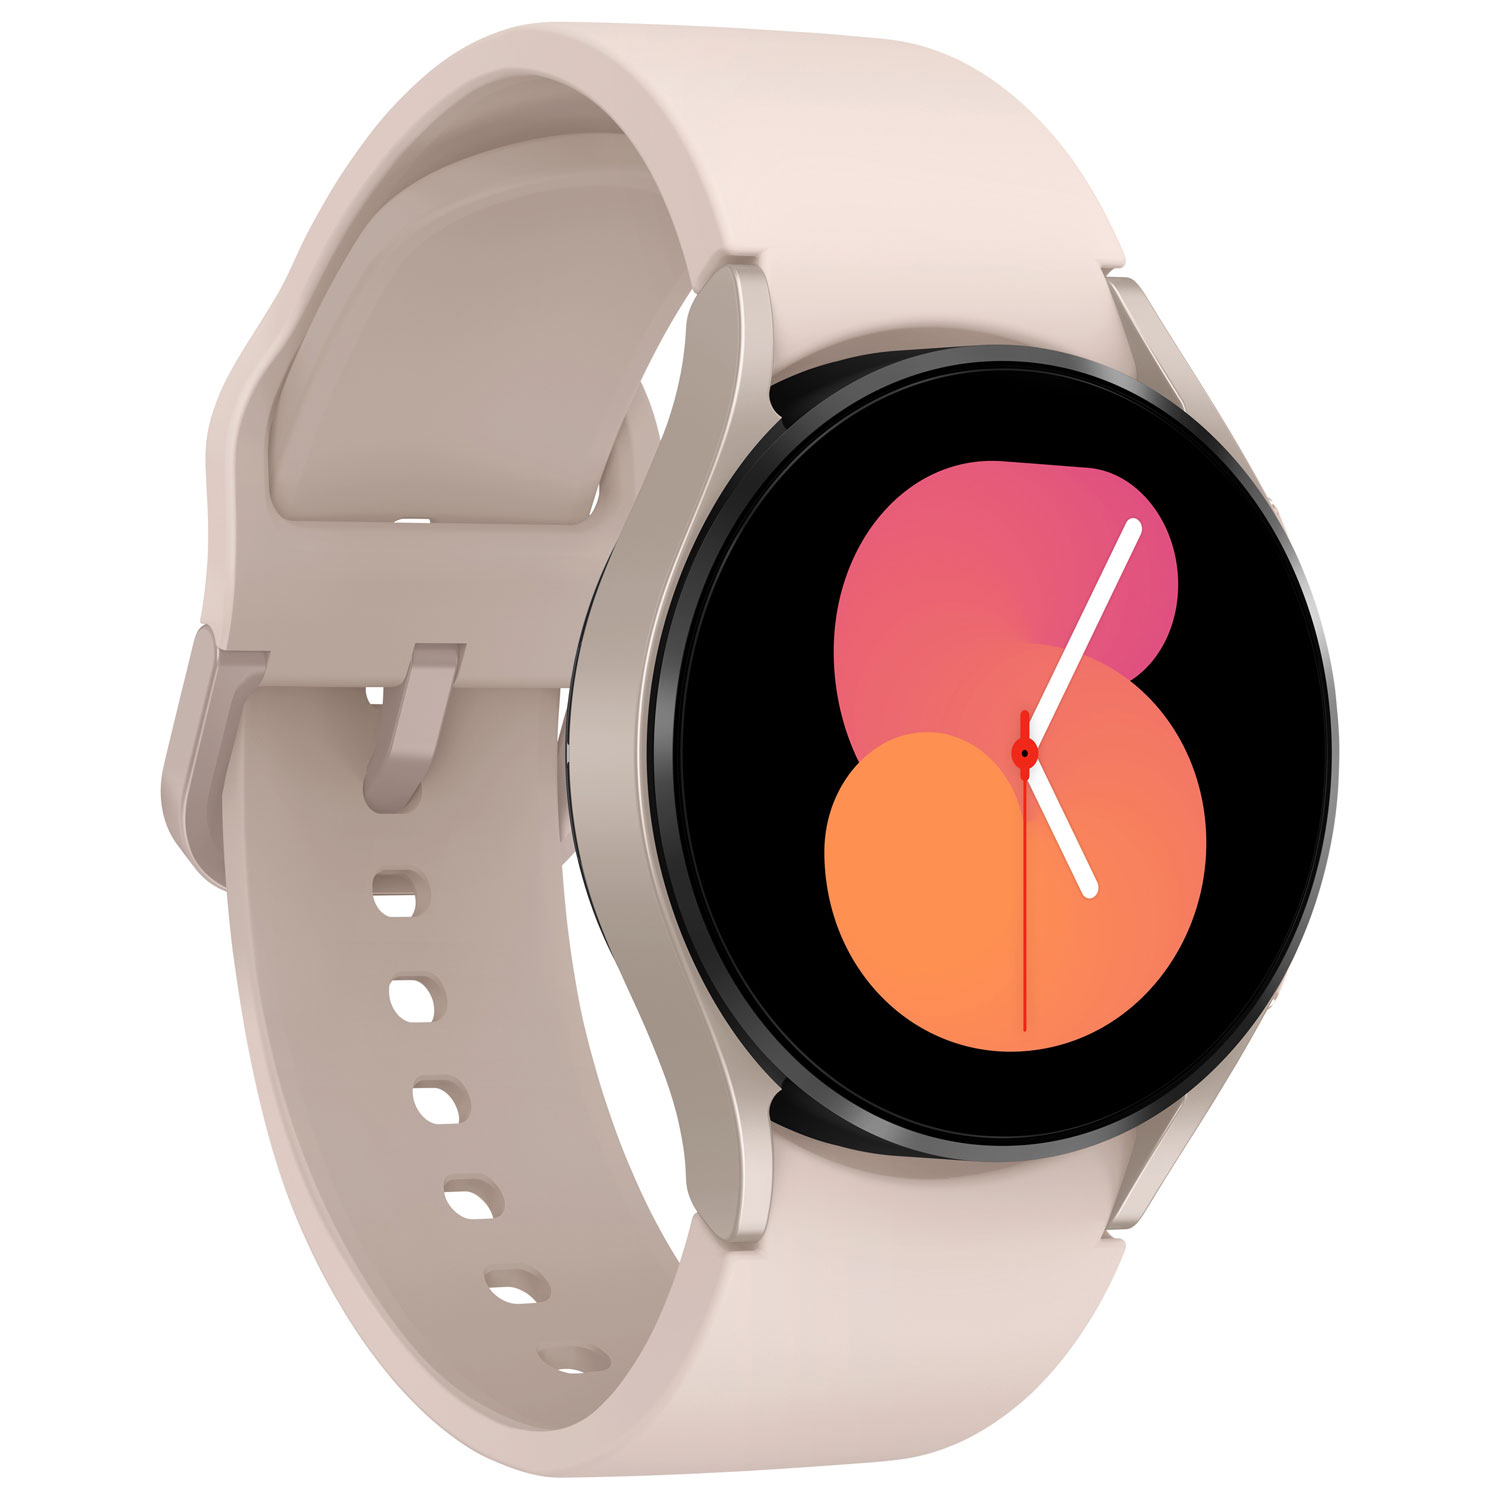 Samsung Galaxy Watch5 (GPS + LTE) 40mm Smartwatch with Heart Rate Monitor - Pink Gold